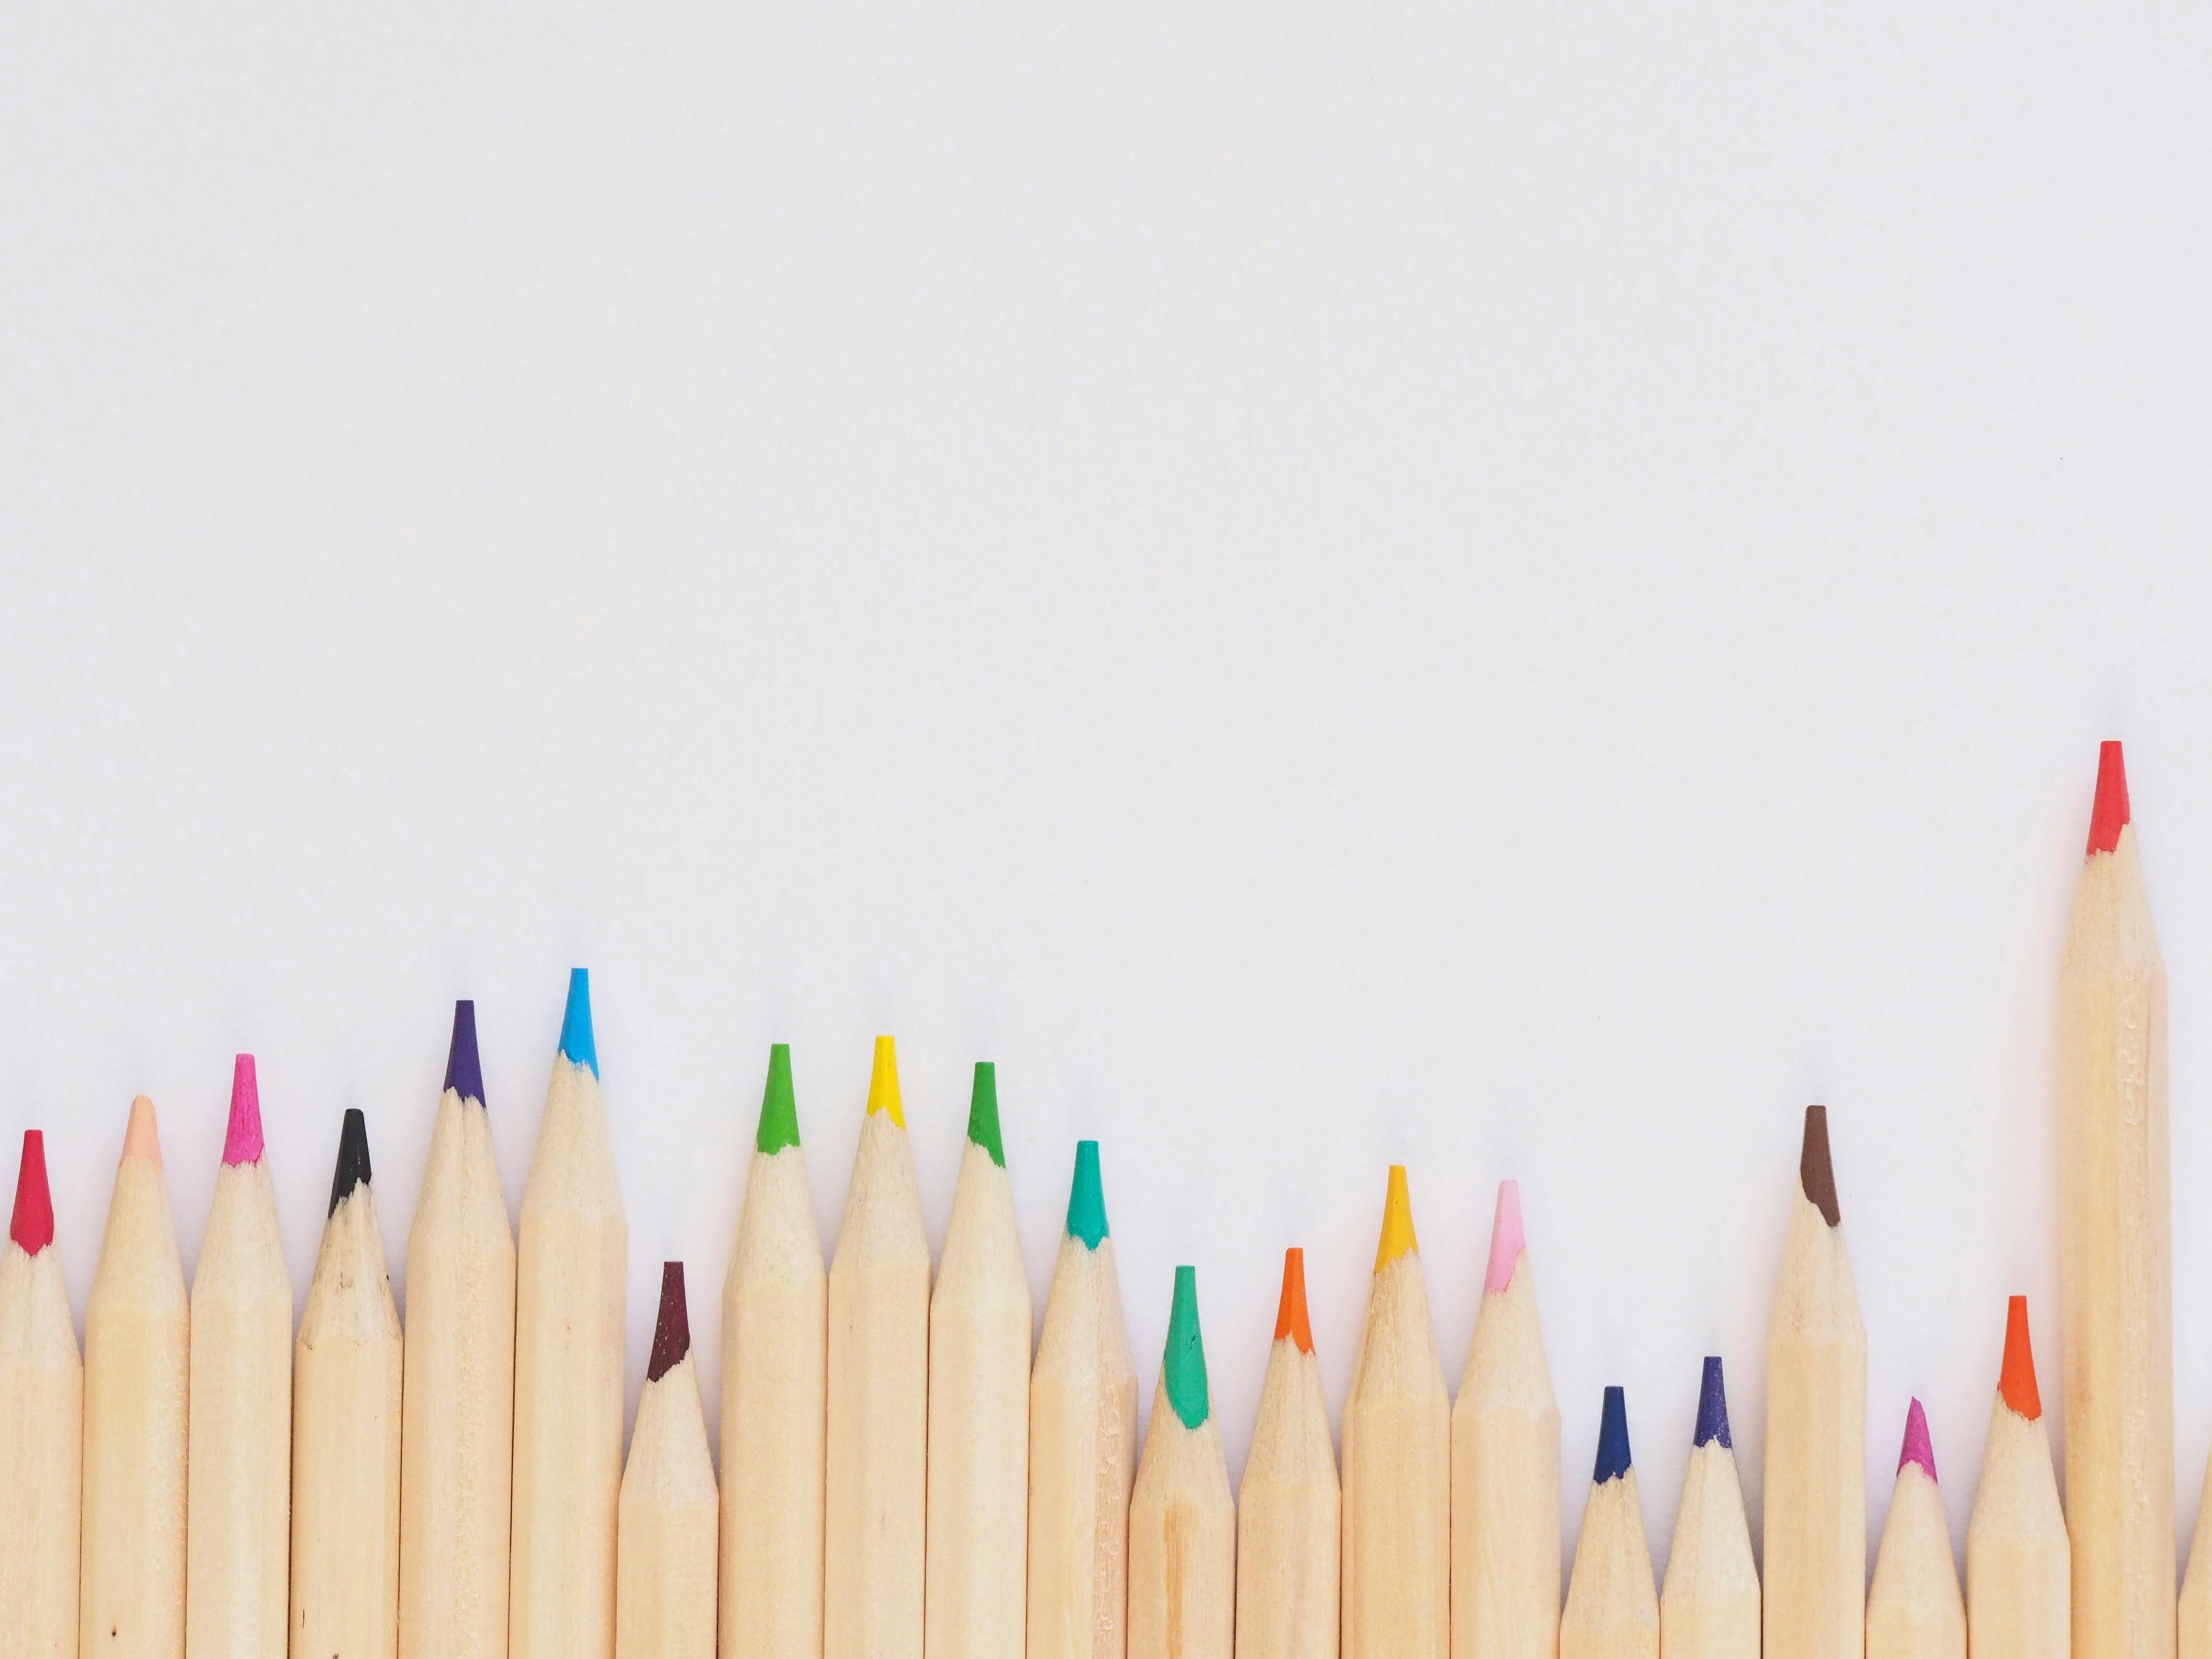 500 Pencil Pictures  Download Free Images  Stock Photos on Unsplash